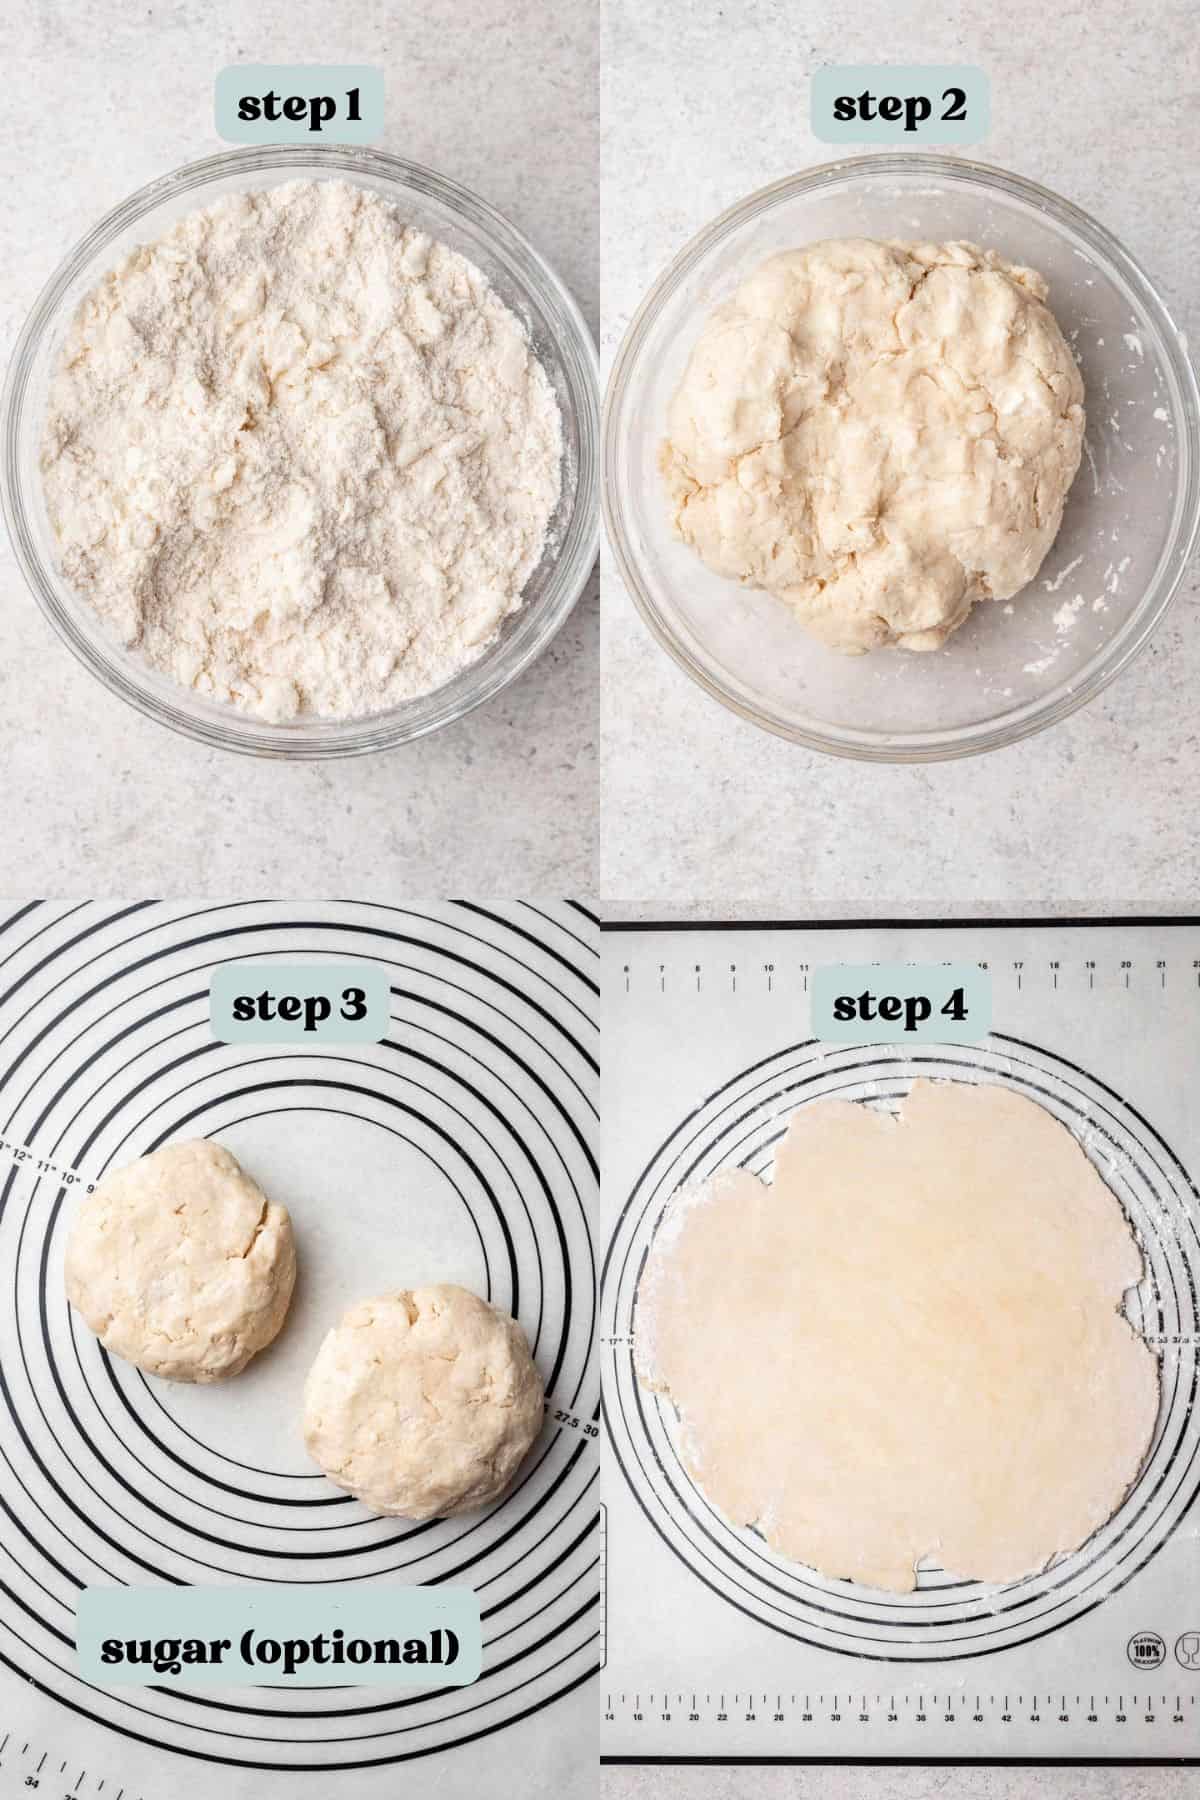 Step by step instructions showing how to make a pie crust from scratch. Collage of 4 images showing progression.